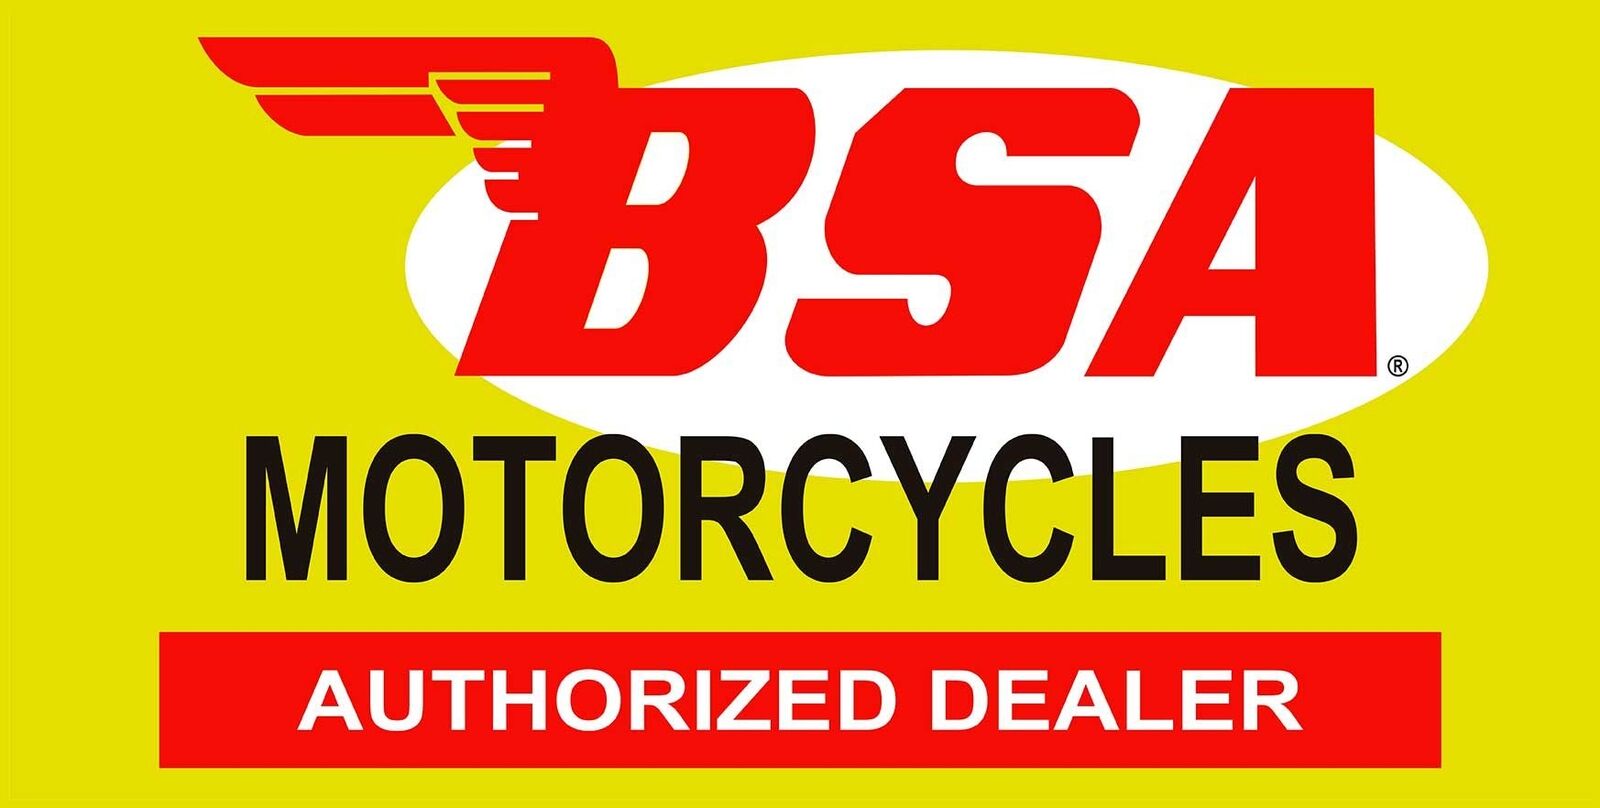 BSA MOTORCYCLES AUTHORIZED DEALER 24\